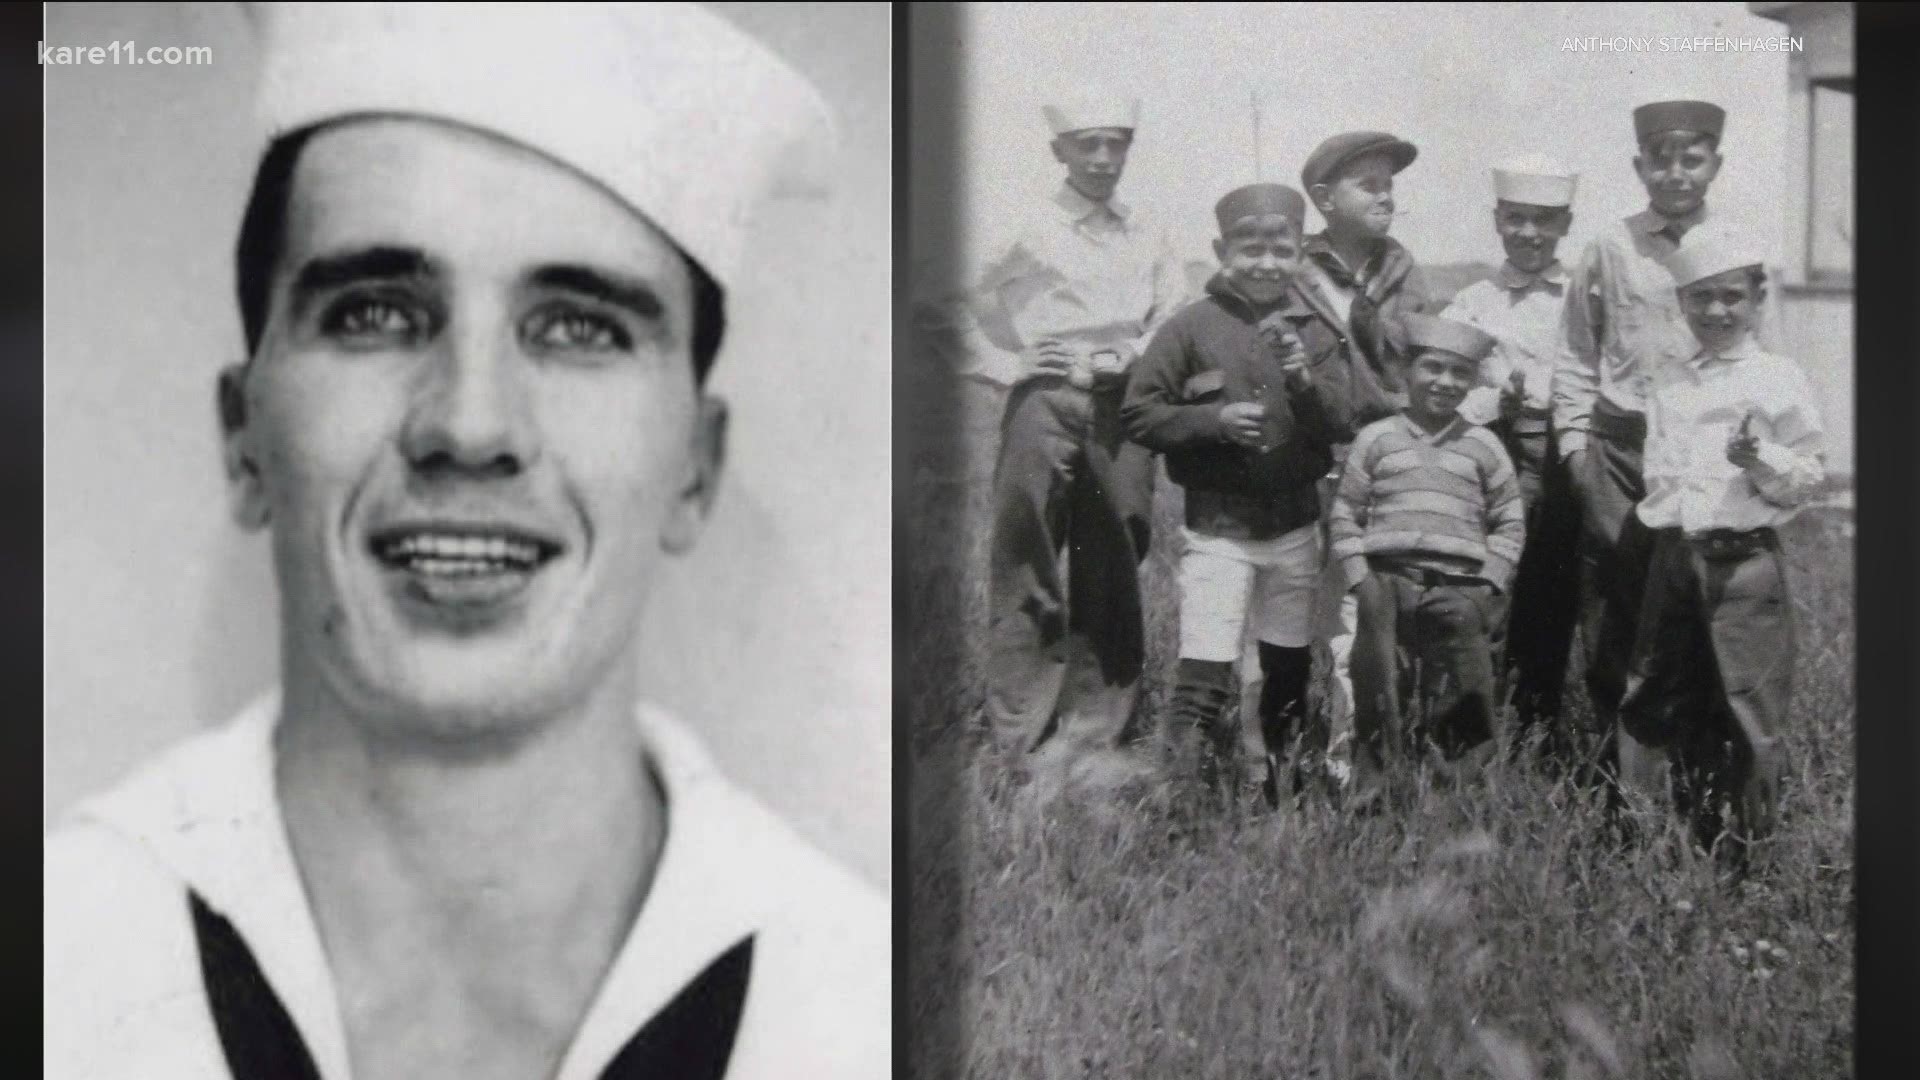 The identity of Neal Kenneth Todd, who died while serving on the USS Oklahoma, was finally confirmed this year through DNA evidence.